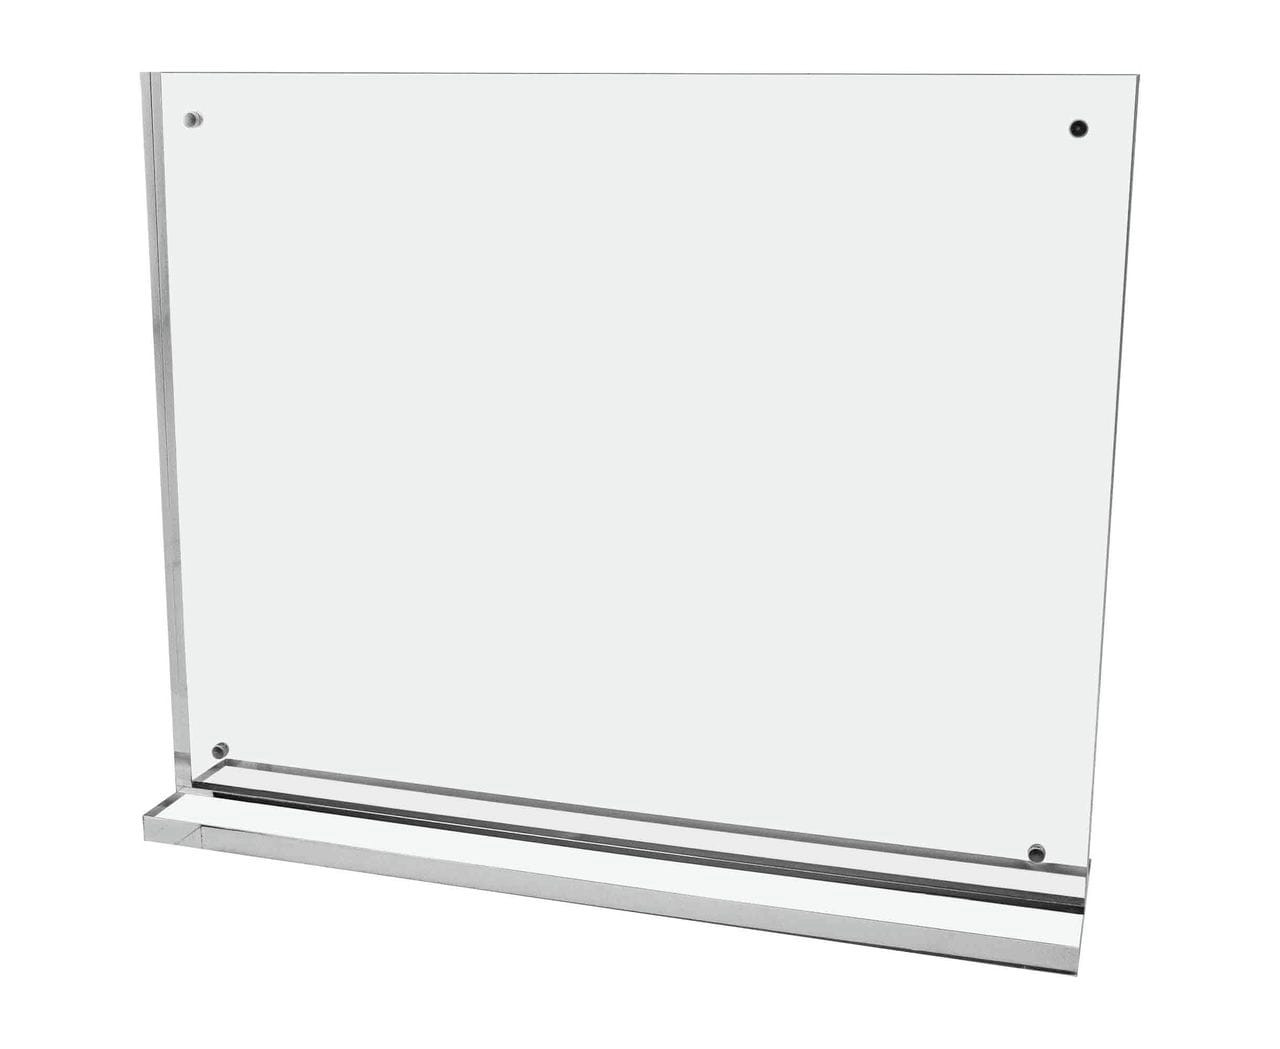 11”W x 8.5”H Sign Display with Base Photo Holder Thick Acrylic